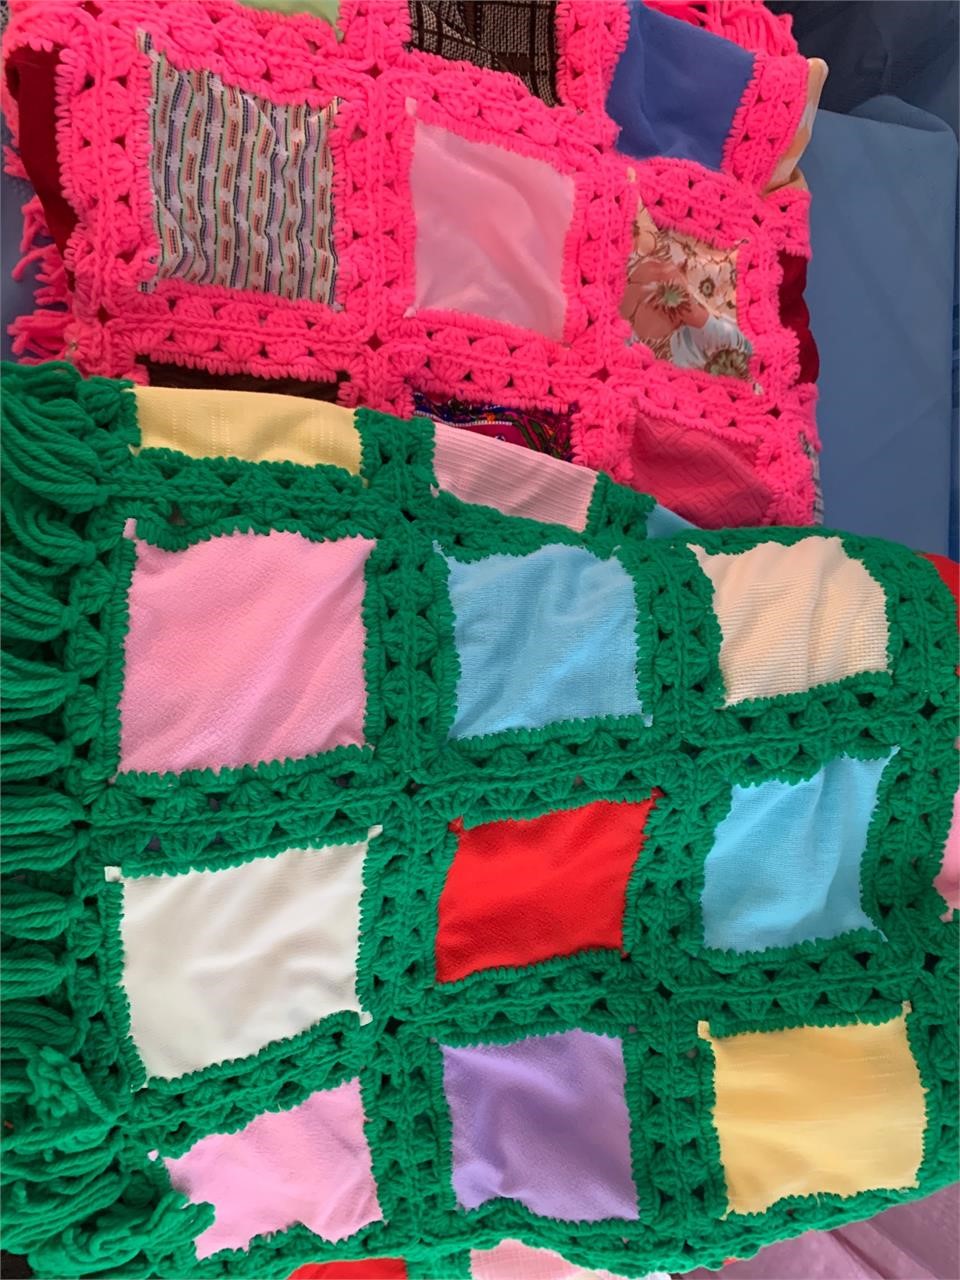 Crocheted Blankets Pink & Green